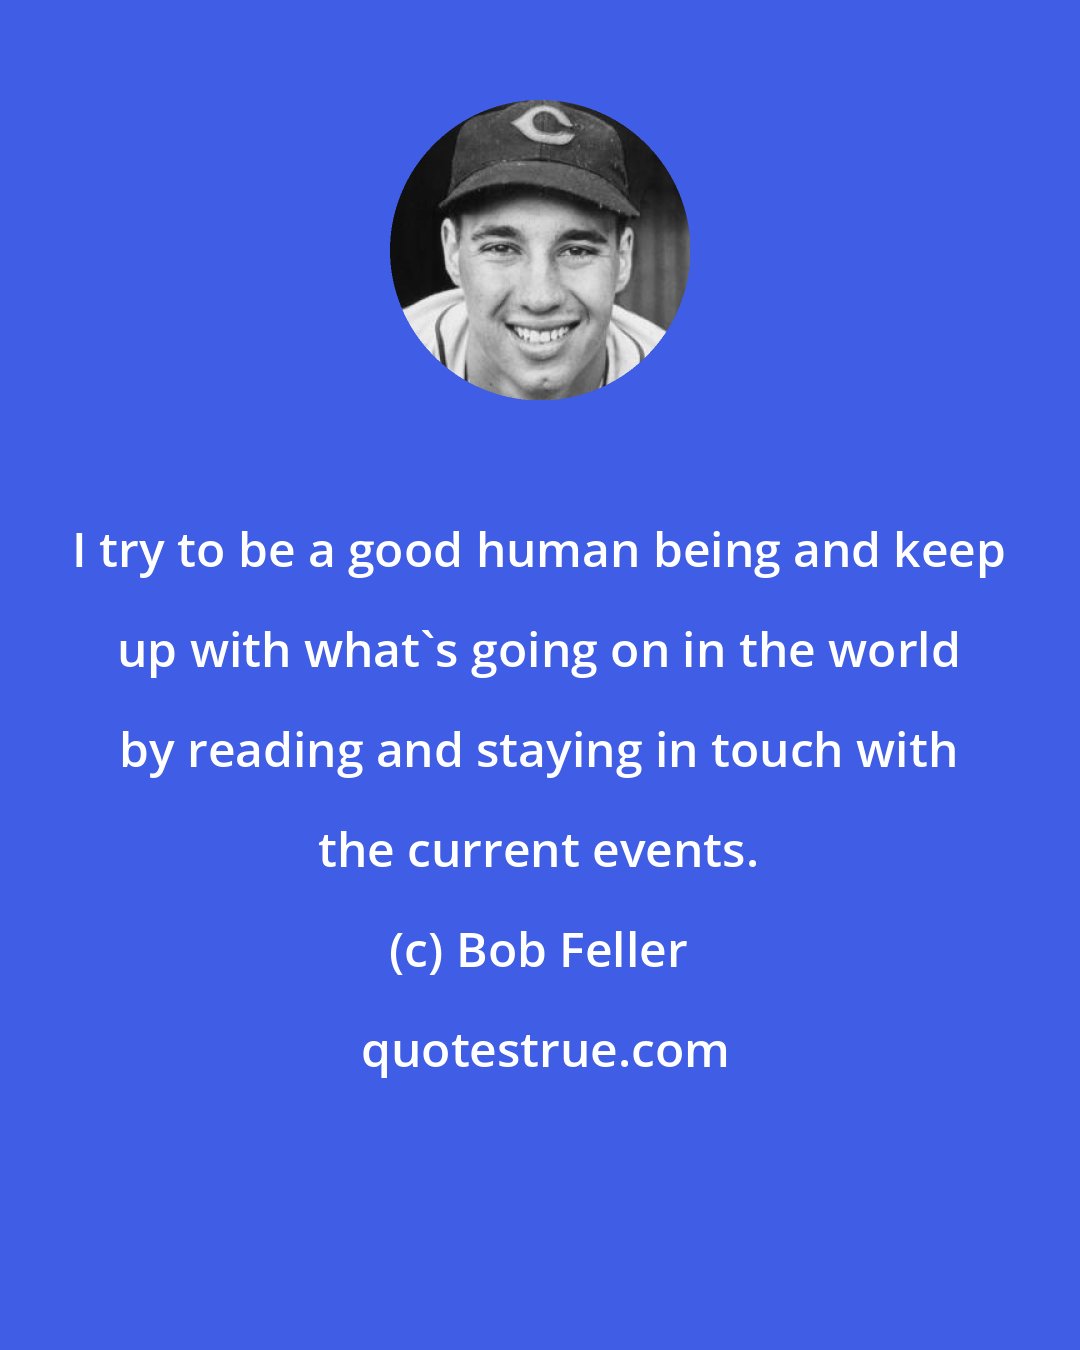 Bob Feller: I try to be a good human being and keep up with what's going on in the world by reading and staying in touch with the current events.